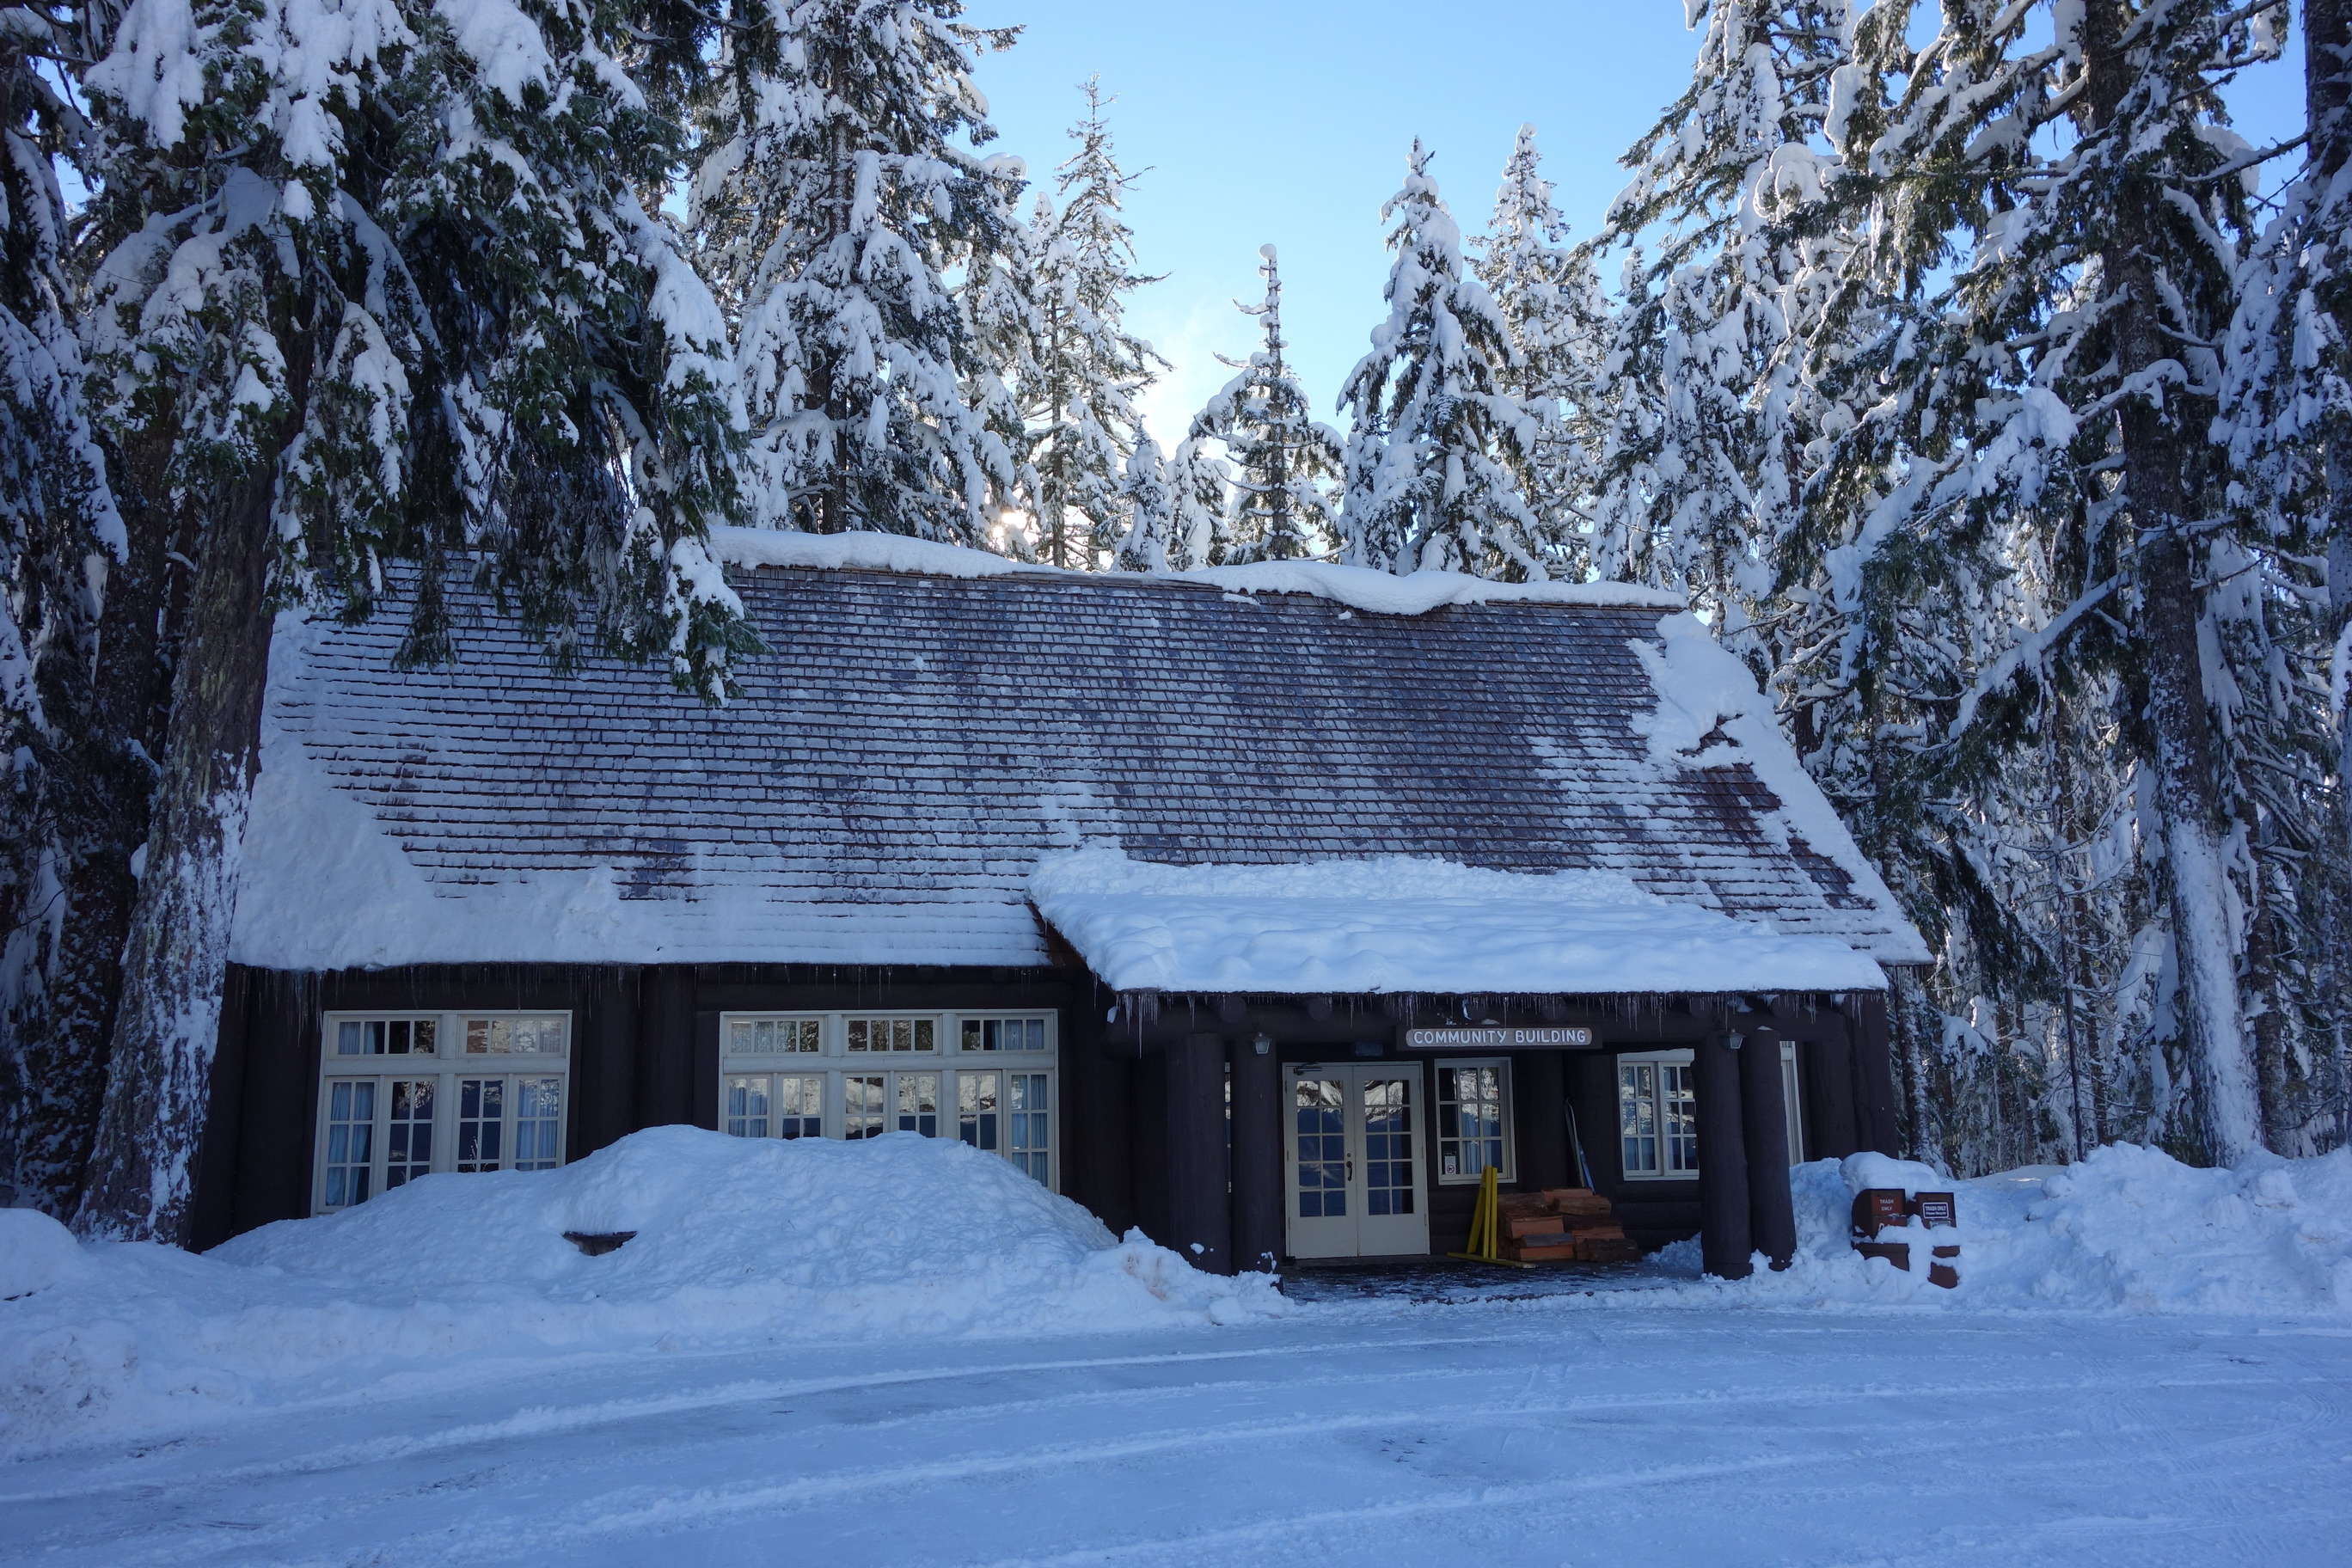 A large log building in a snowy forest with a steep shingle roof and a porch supported by log beams. The roof is covered in snow with icicles hanging off the porch. A sign over the porch reads “Community Building”. 